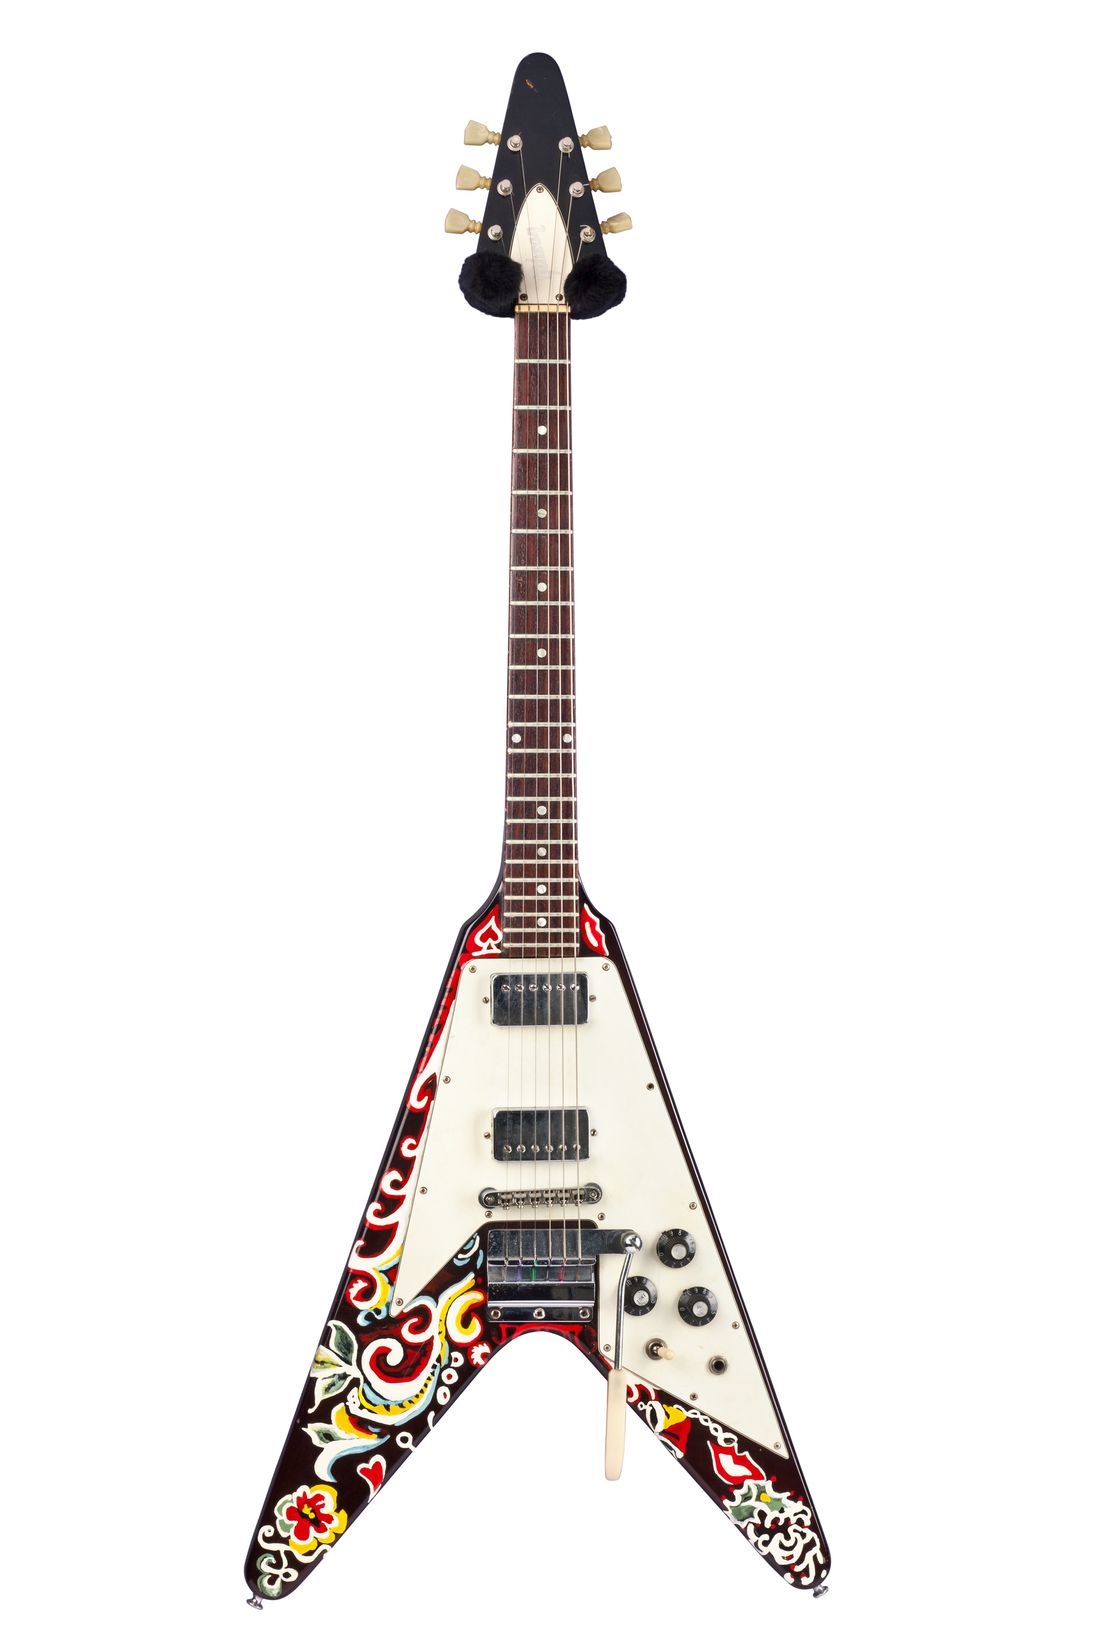 Jimi Hendrix's "Love Drops" Gibson Flying V electric guitar (which he painted), and may have been used on the album "Electric Ladyland"